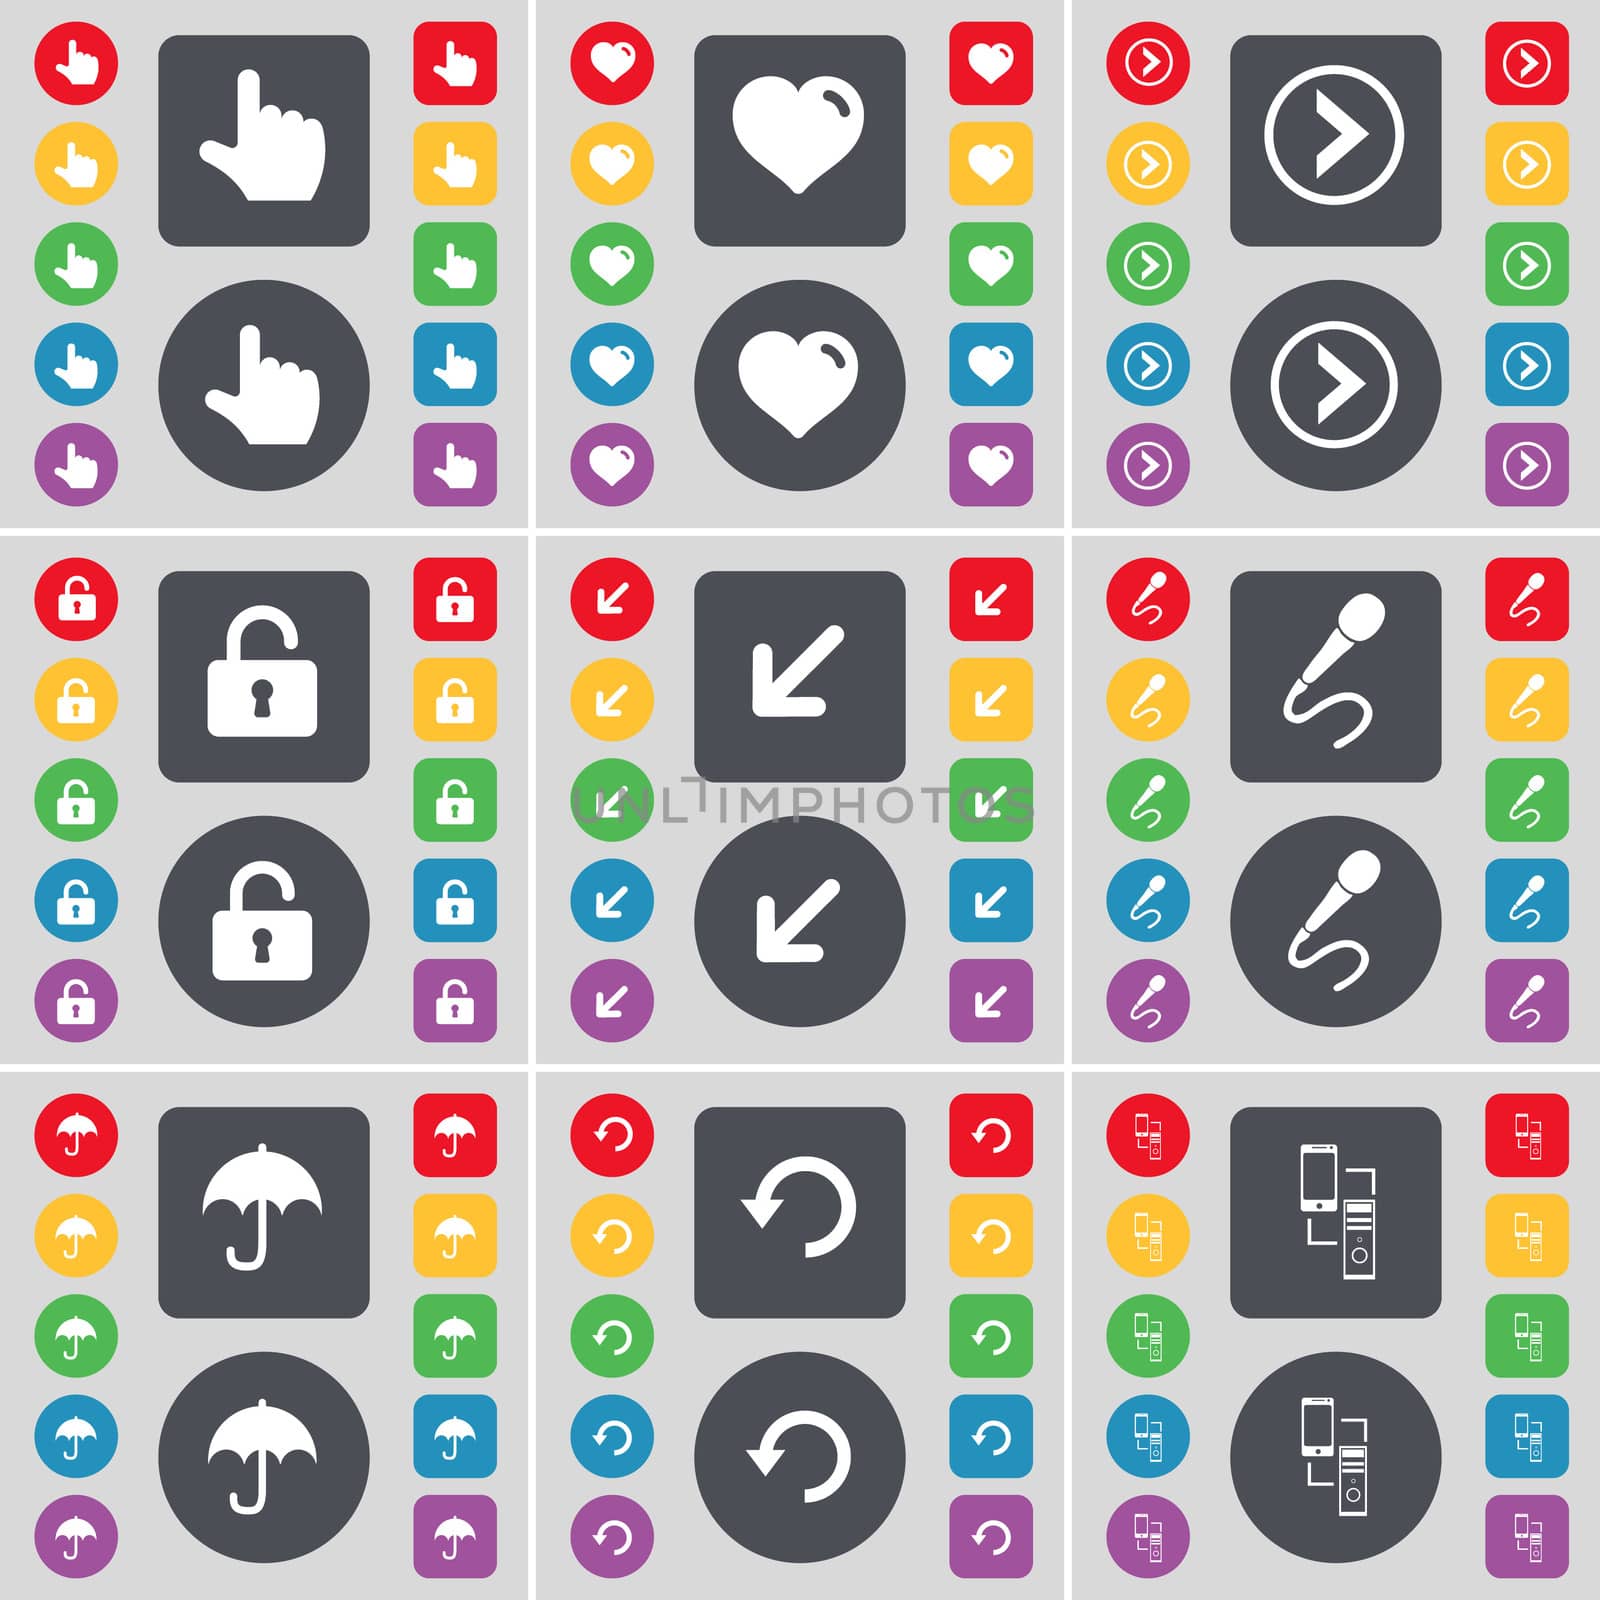 Hand, Heart, Arrow right, Lock, Deploying screen, Microphone, Umbrella, Reload, Connection icon symbol. A large set of flat, colored buttons for your design.  by serhii_lohvyniuk